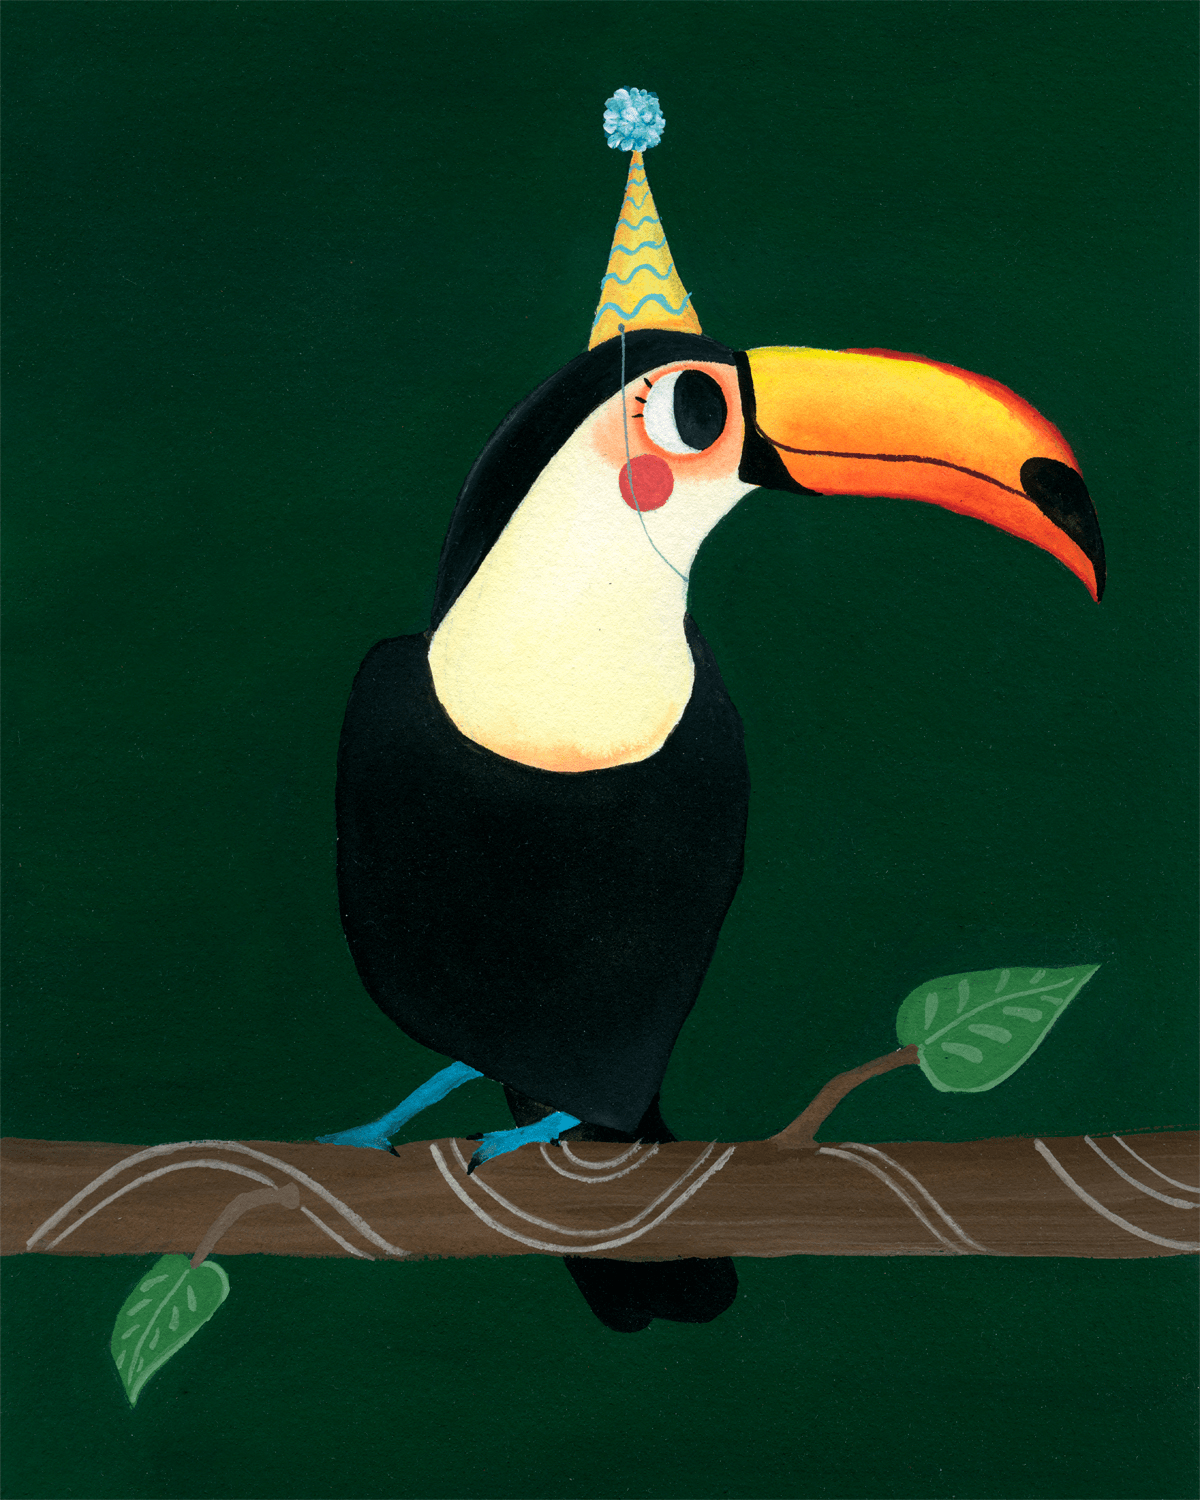 A toucan wearing a party hat perches on a branch